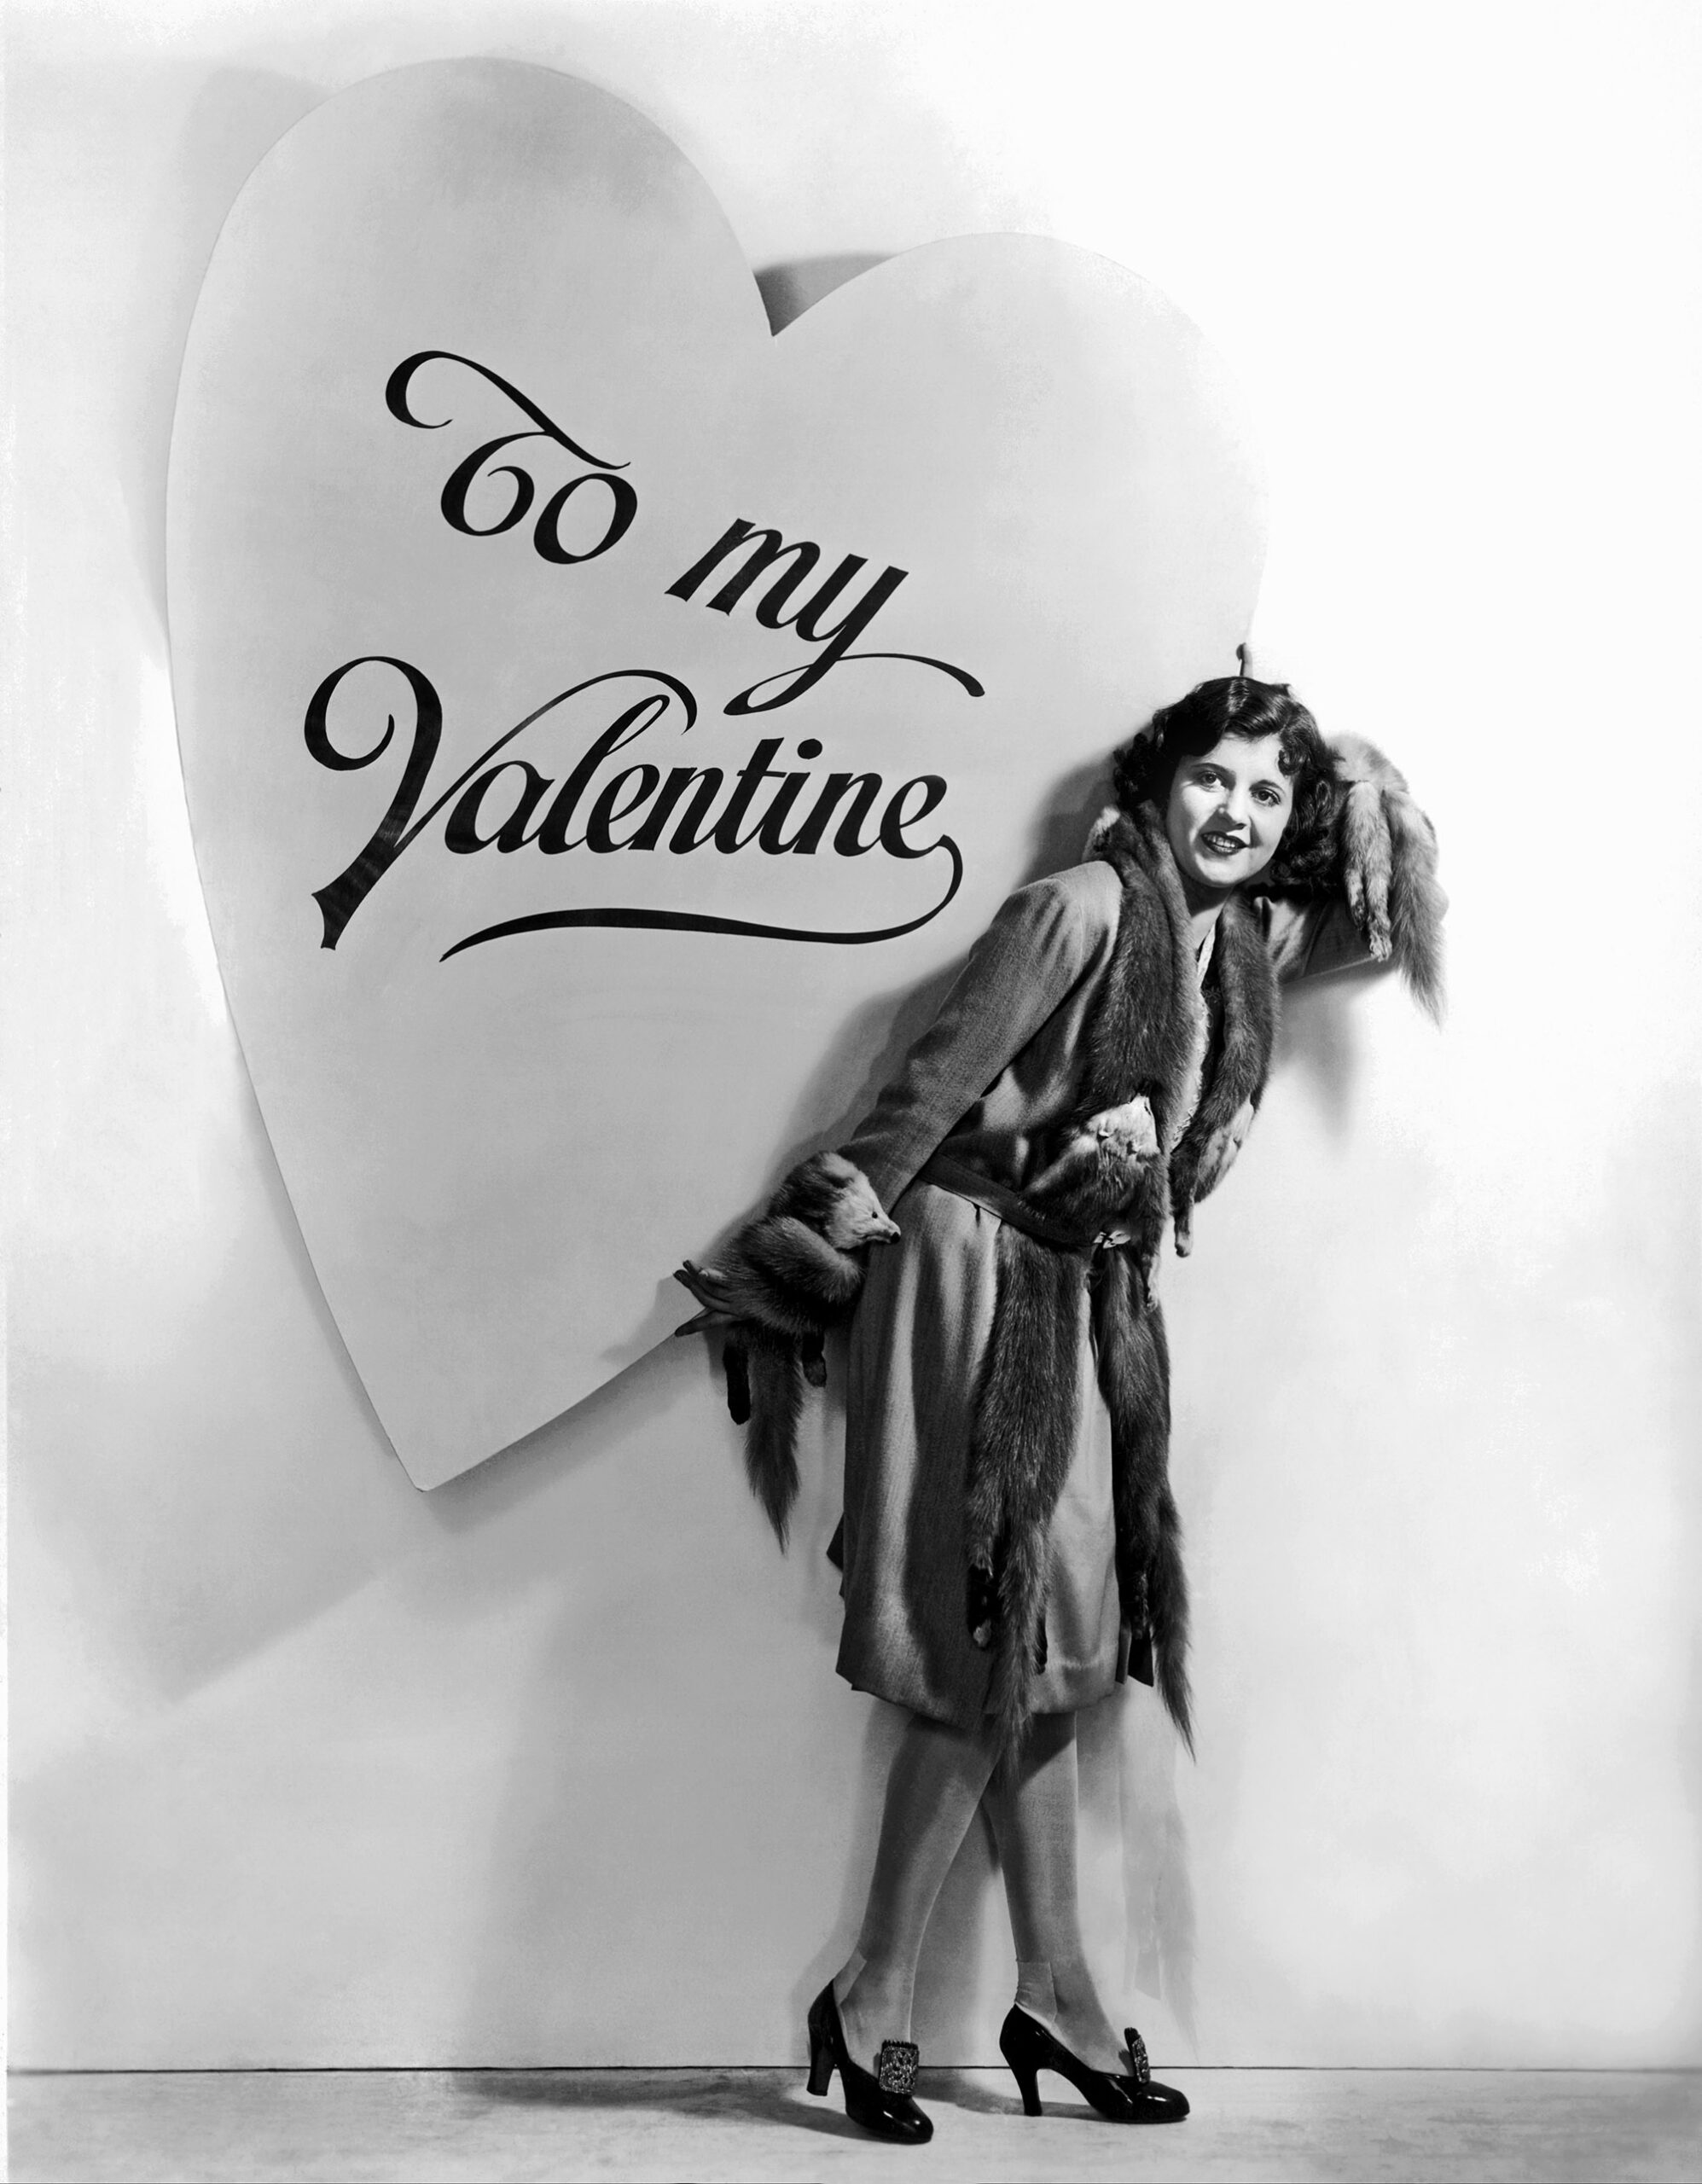 Actress Dorothy Gulliver poses against a backdrop of a large heart, in which reads: "To My Valentine" in this 1930s studio portrait.